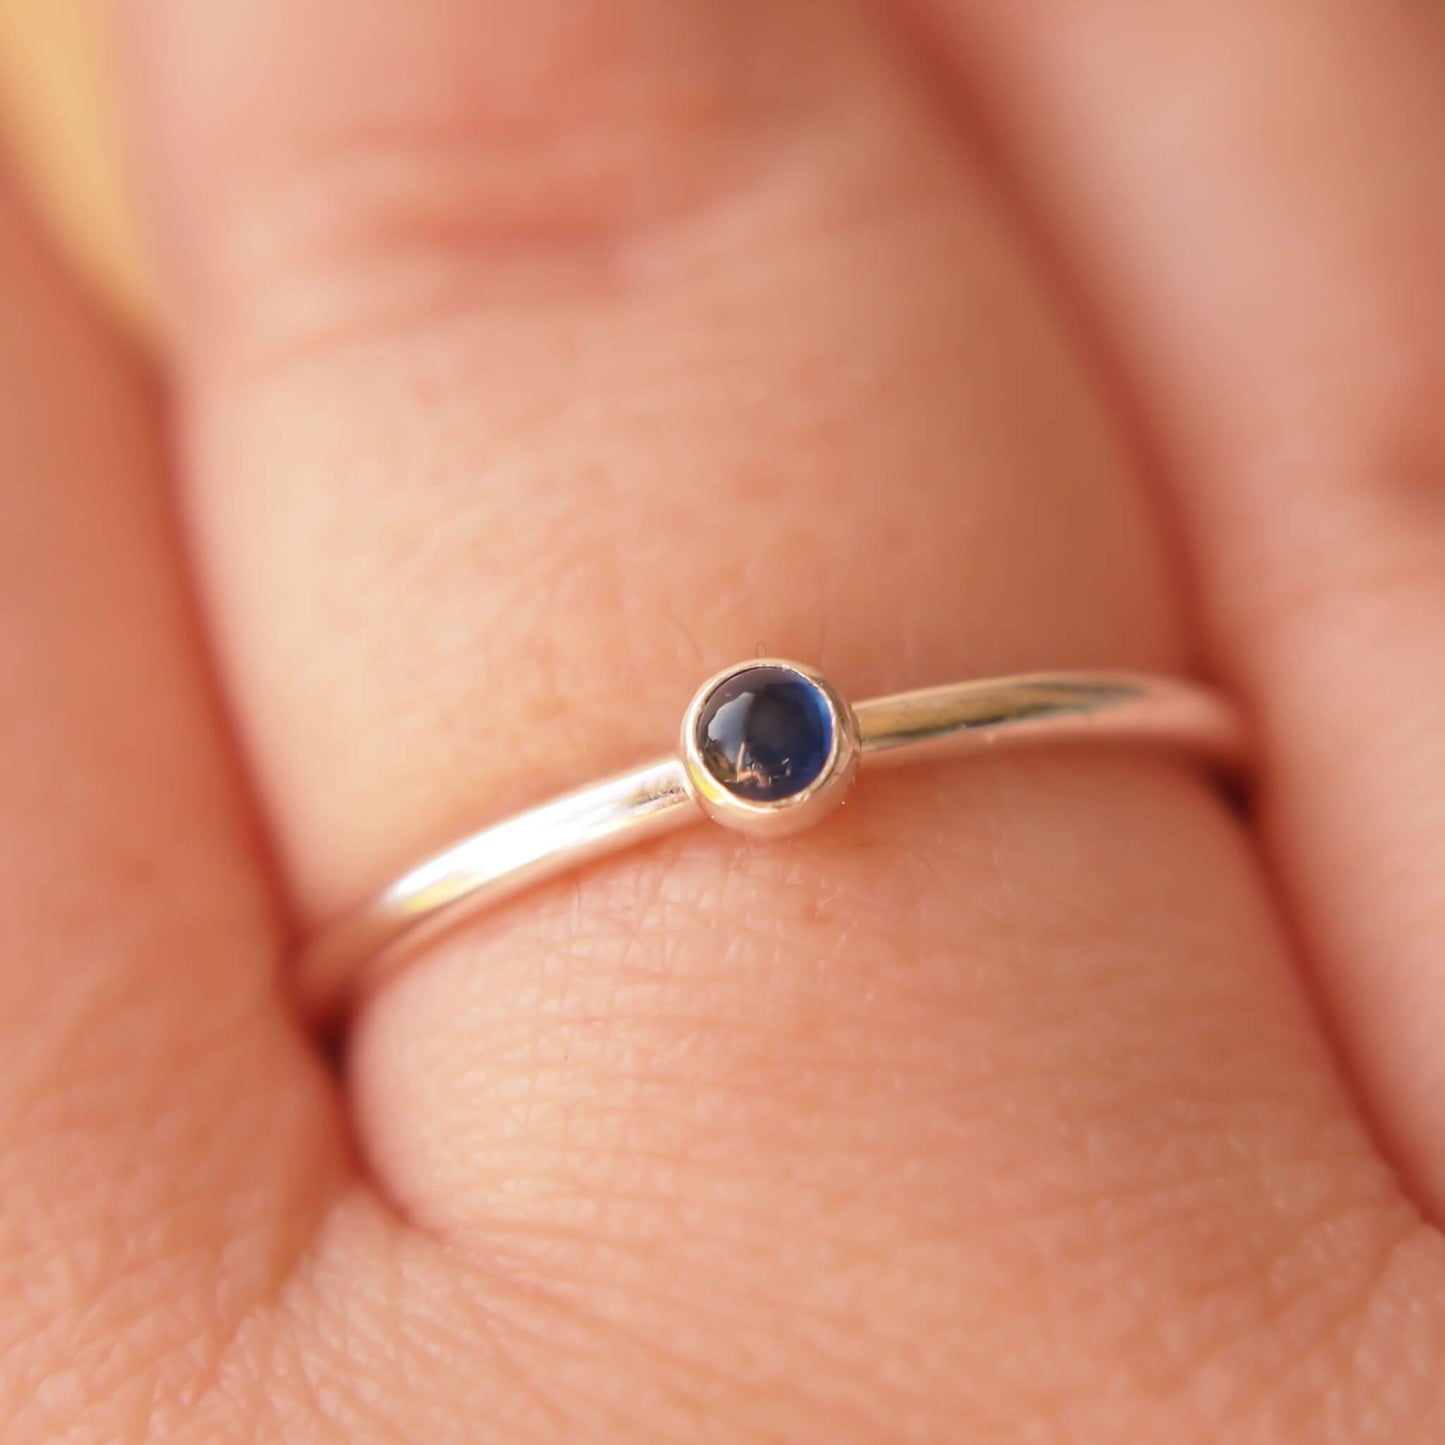 Simple Sapphire gemstone ring in sterling silver with a modern round band with a 3mm sized round Blue Sapphire Cabochon. Handmade in Edinburgh by Maram Jewellery